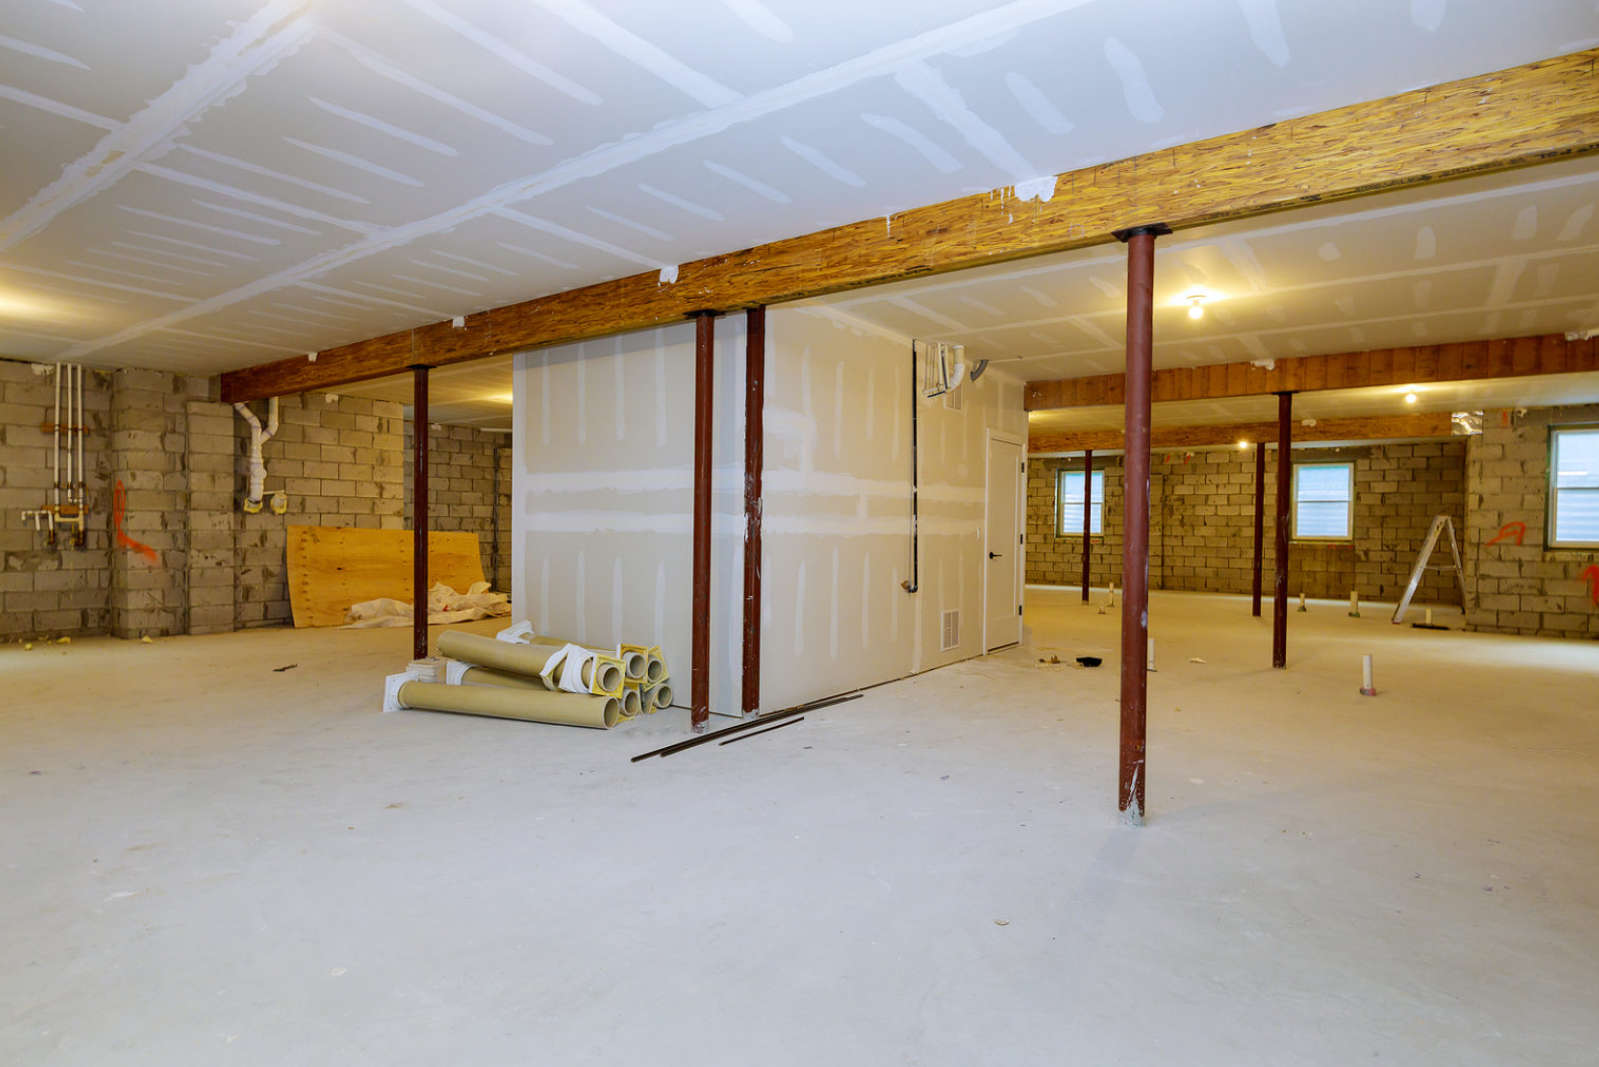 Spring Basement Construction - Yes or Not?